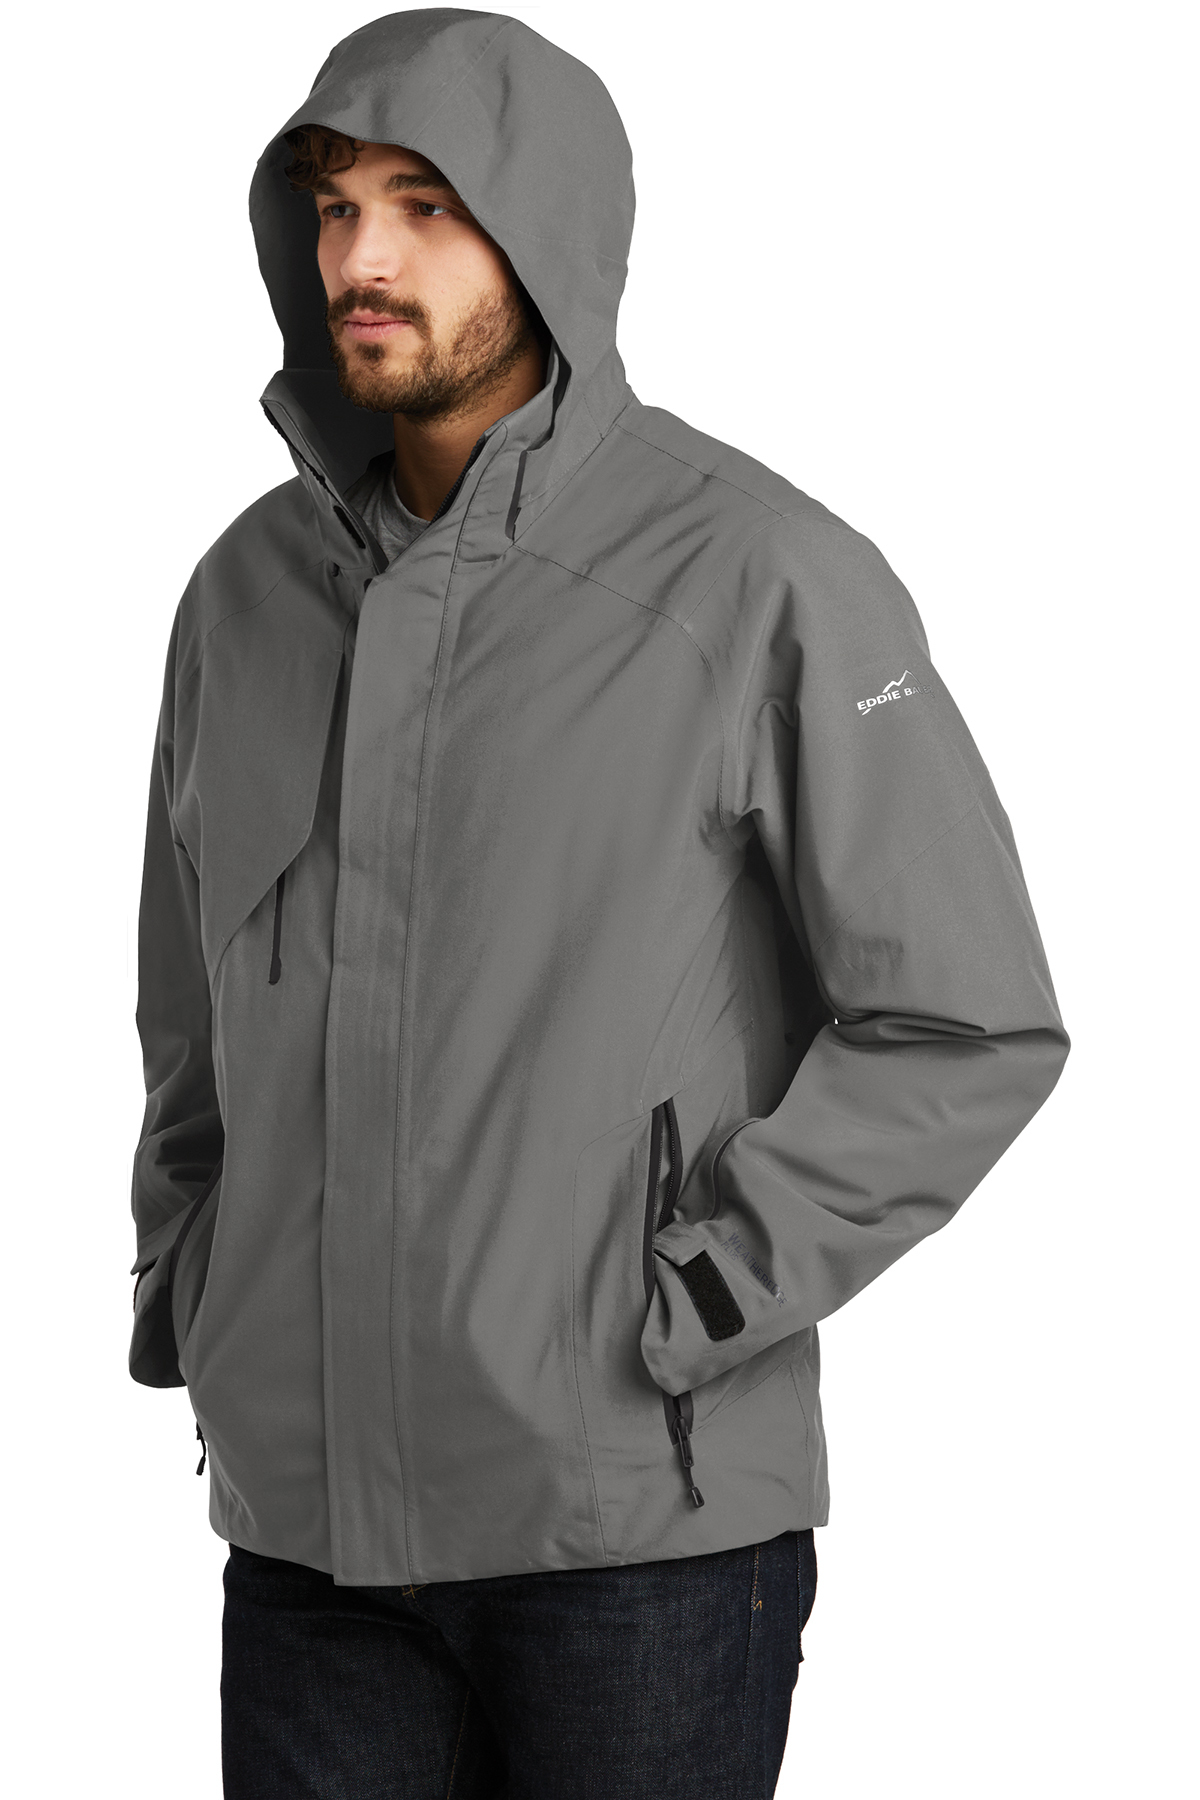 Eddie Bauer WeatherEdge Plus Insulated Jacket | Product | Company Casuals